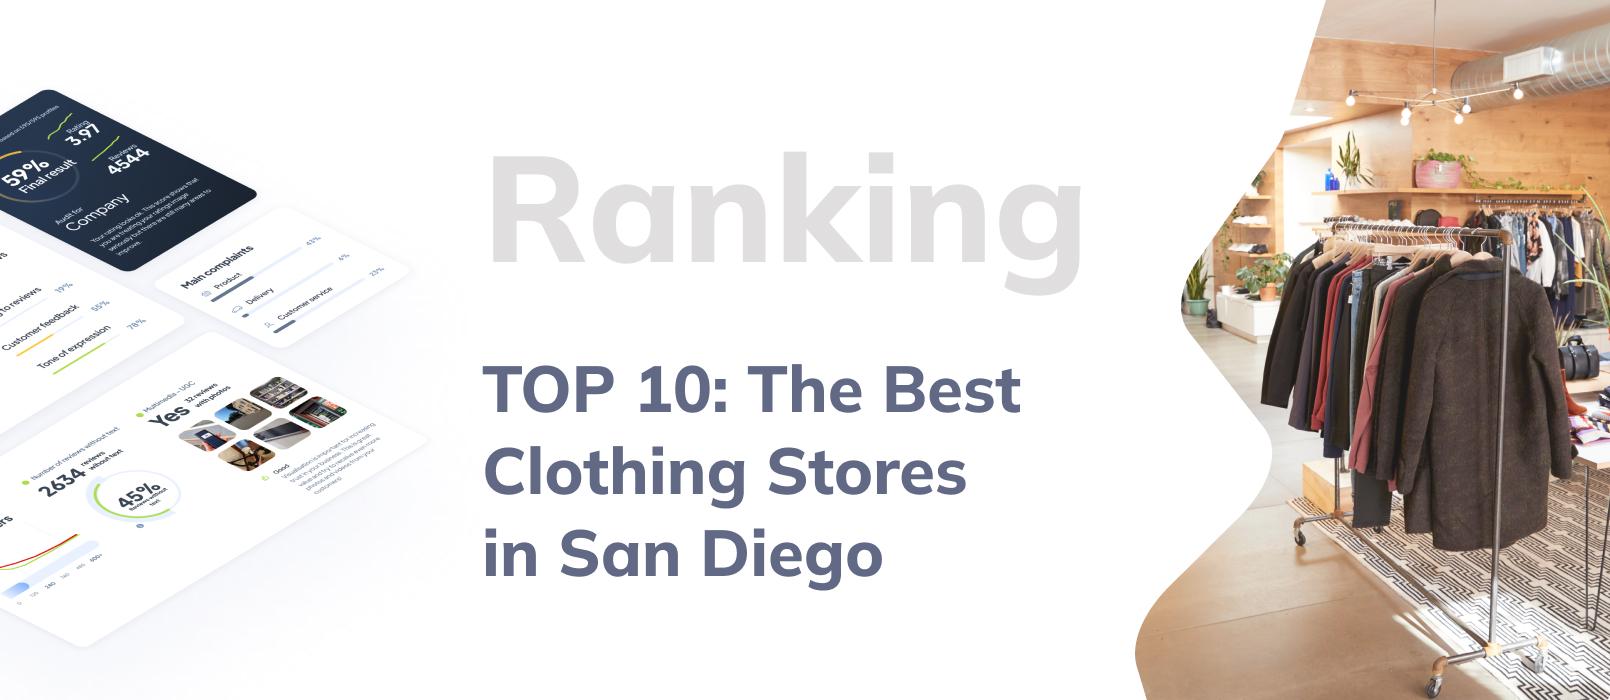 Top 10 Best Clothing Stores in San Diego